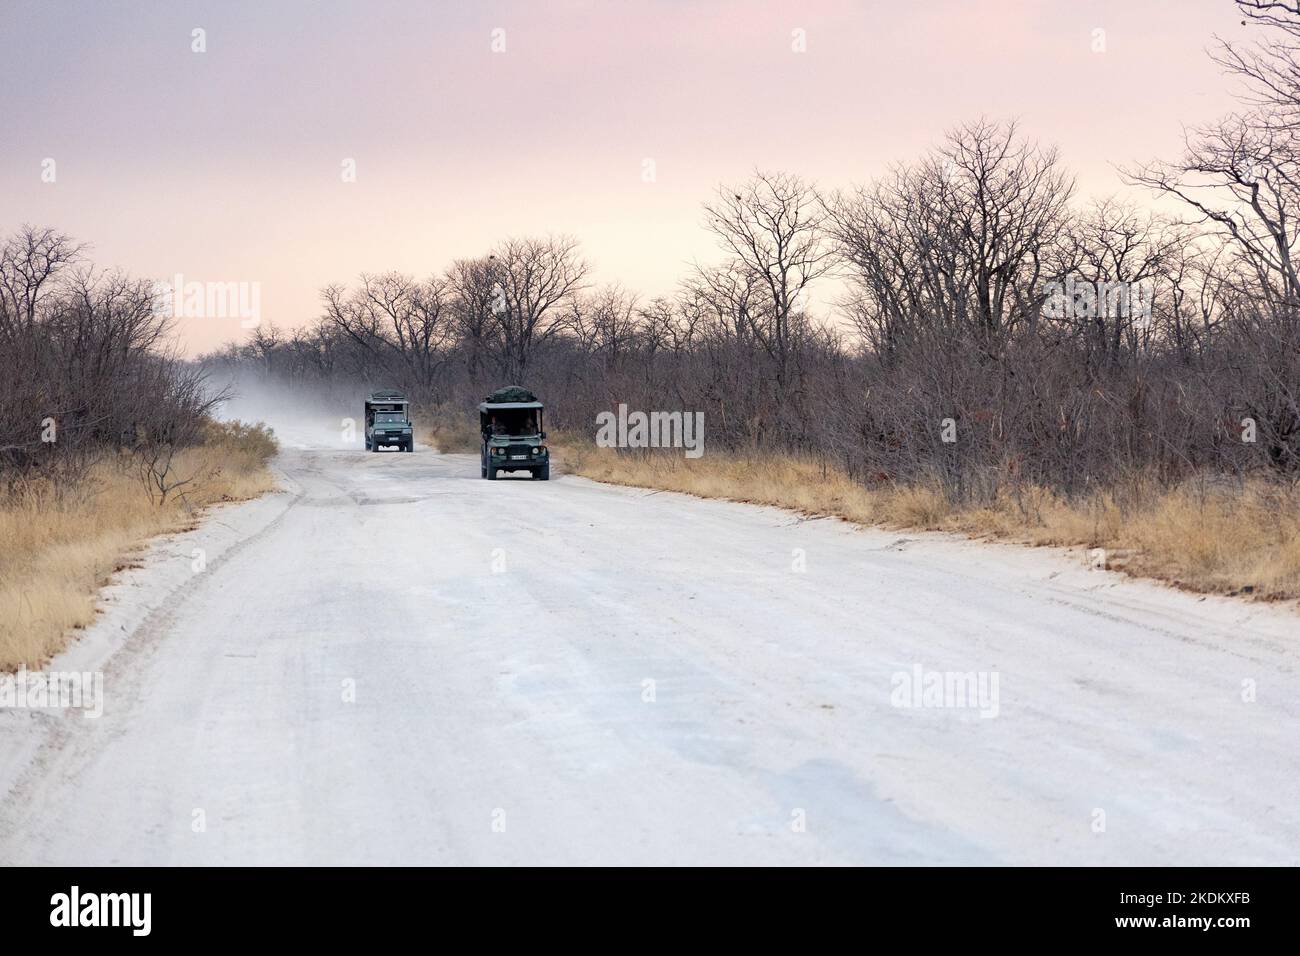 Driving Africa; Cars driving on an unmade African road at dusk, Botswana, Africa Stock Photo